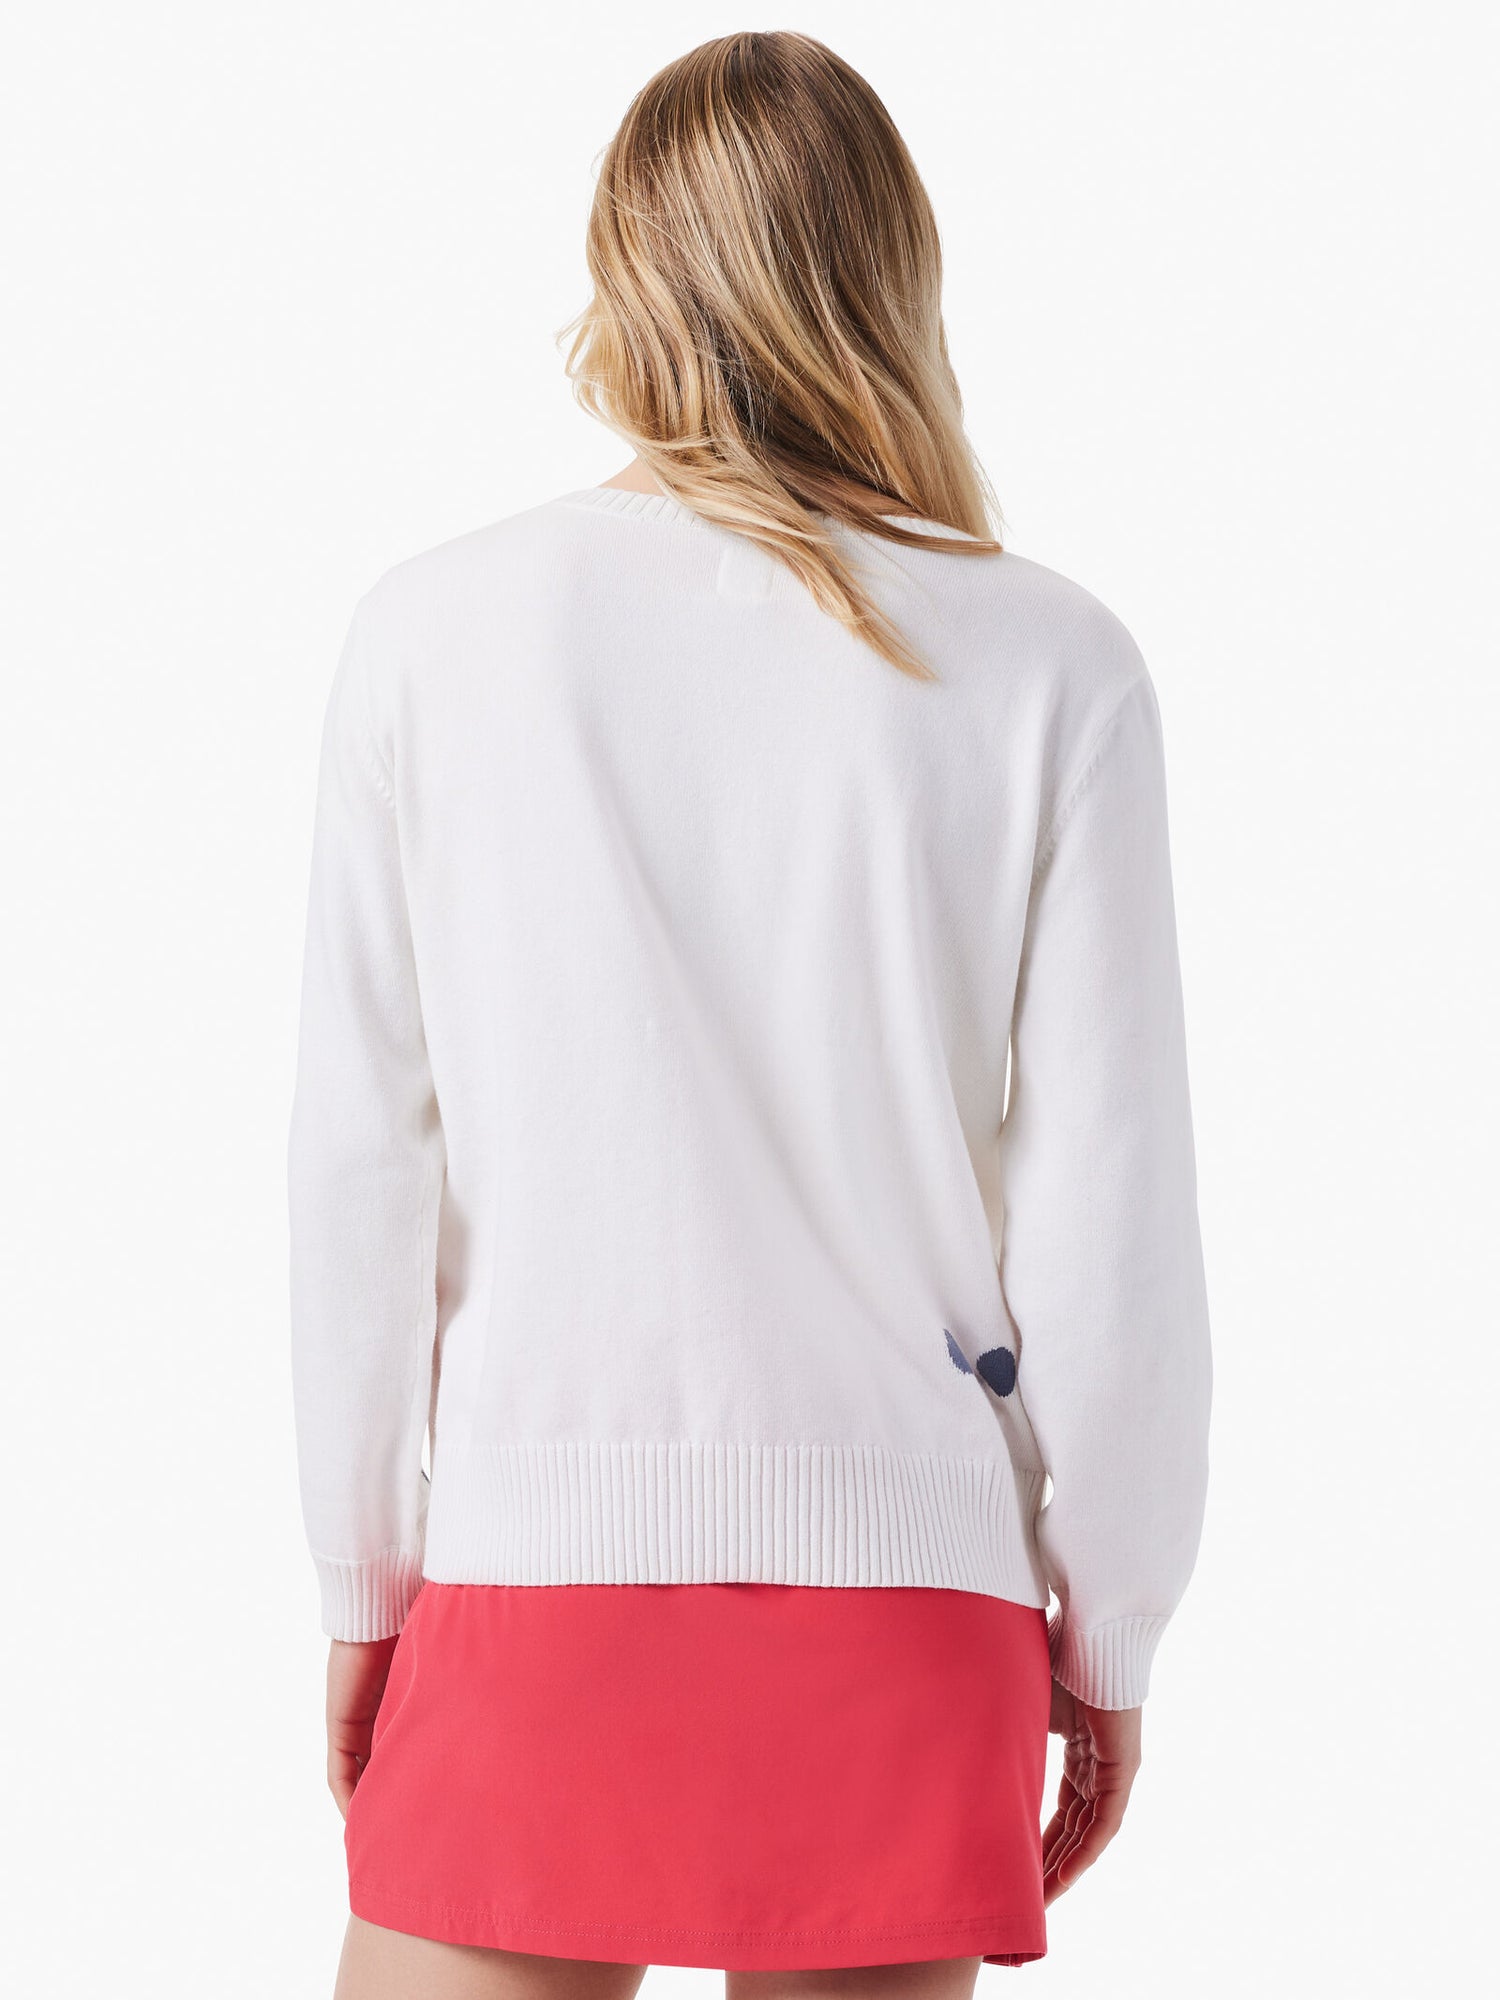 Nic + Zoe Back To Front Dotted Sweater